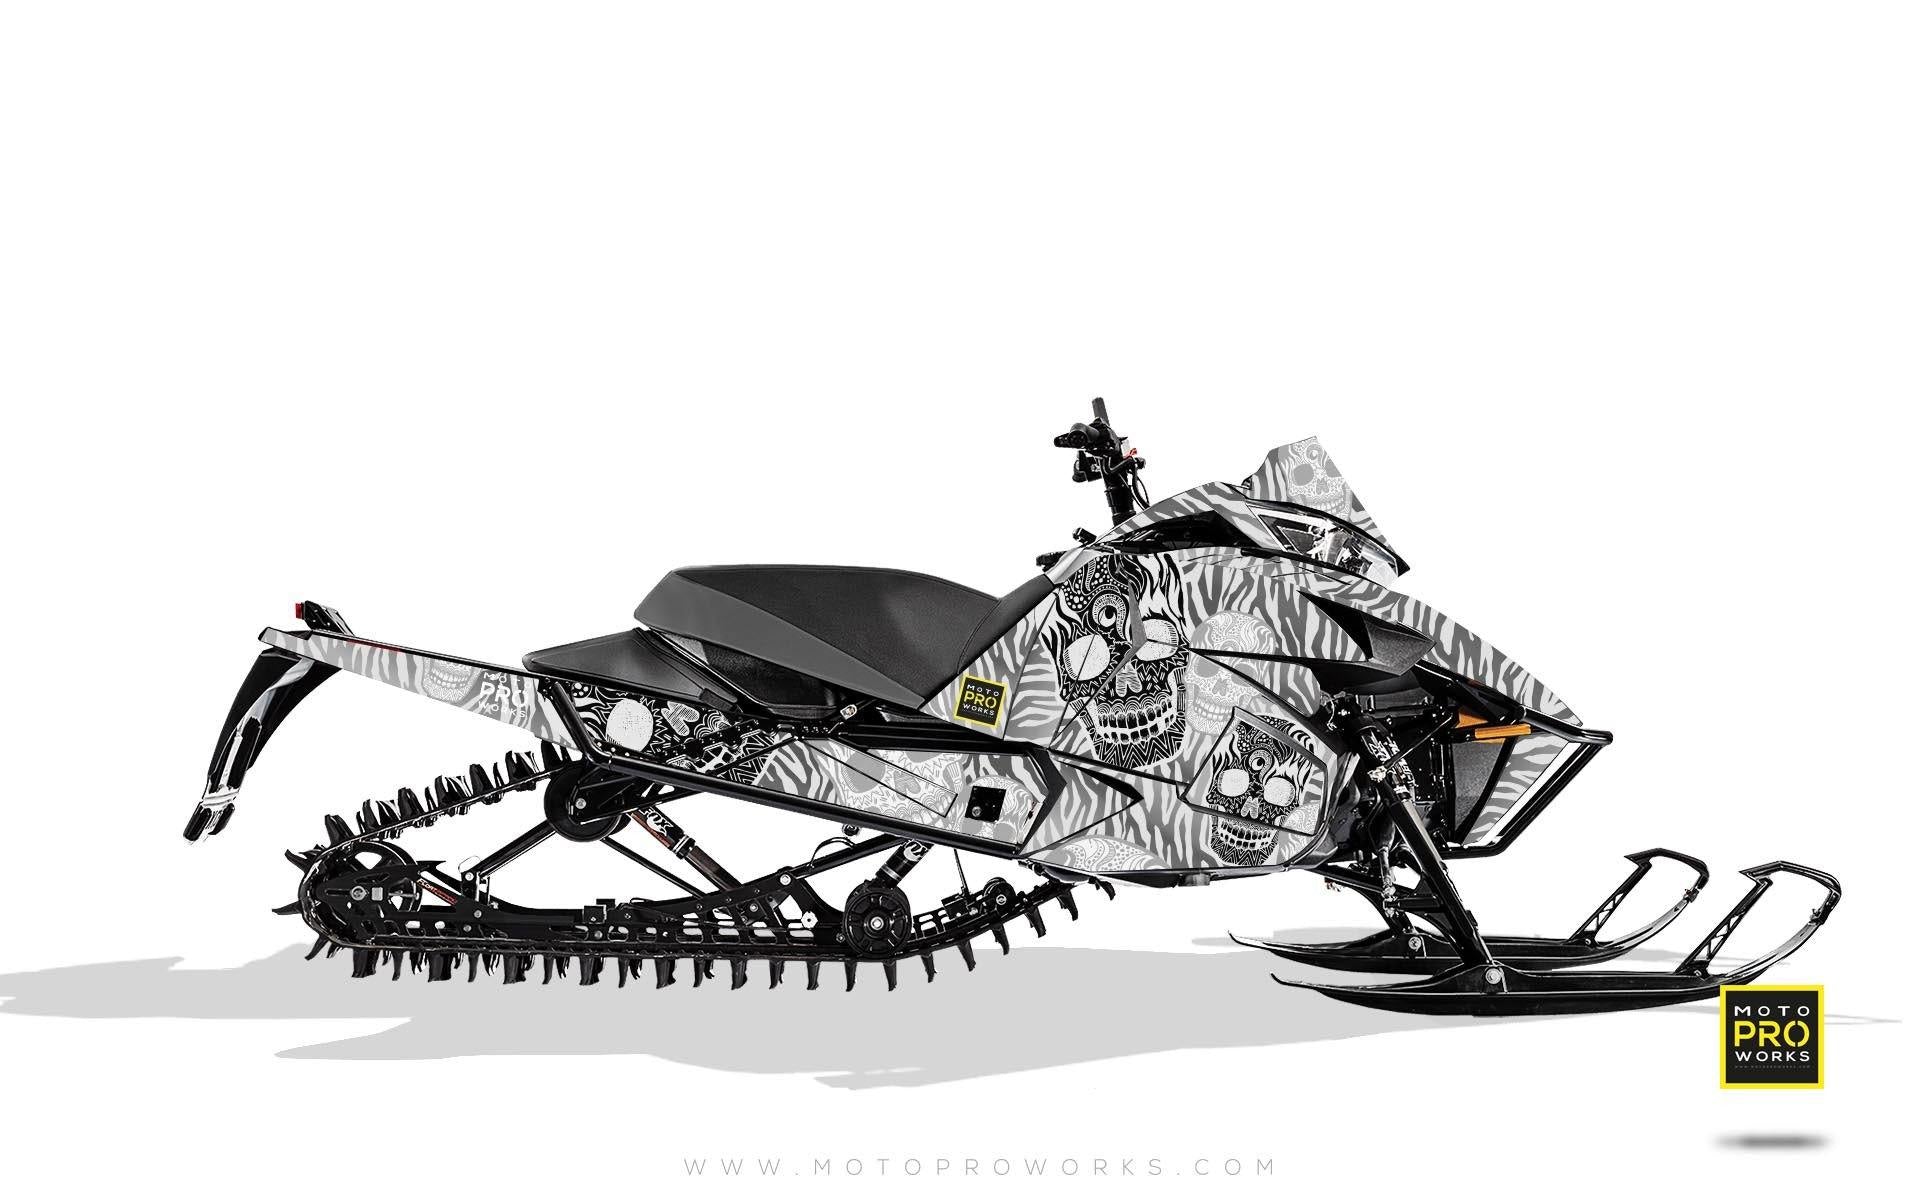 Arctic Cat Graphics - "Fiesta" (white solid) - MotoProWorks | Decals and Bike Graphic kit